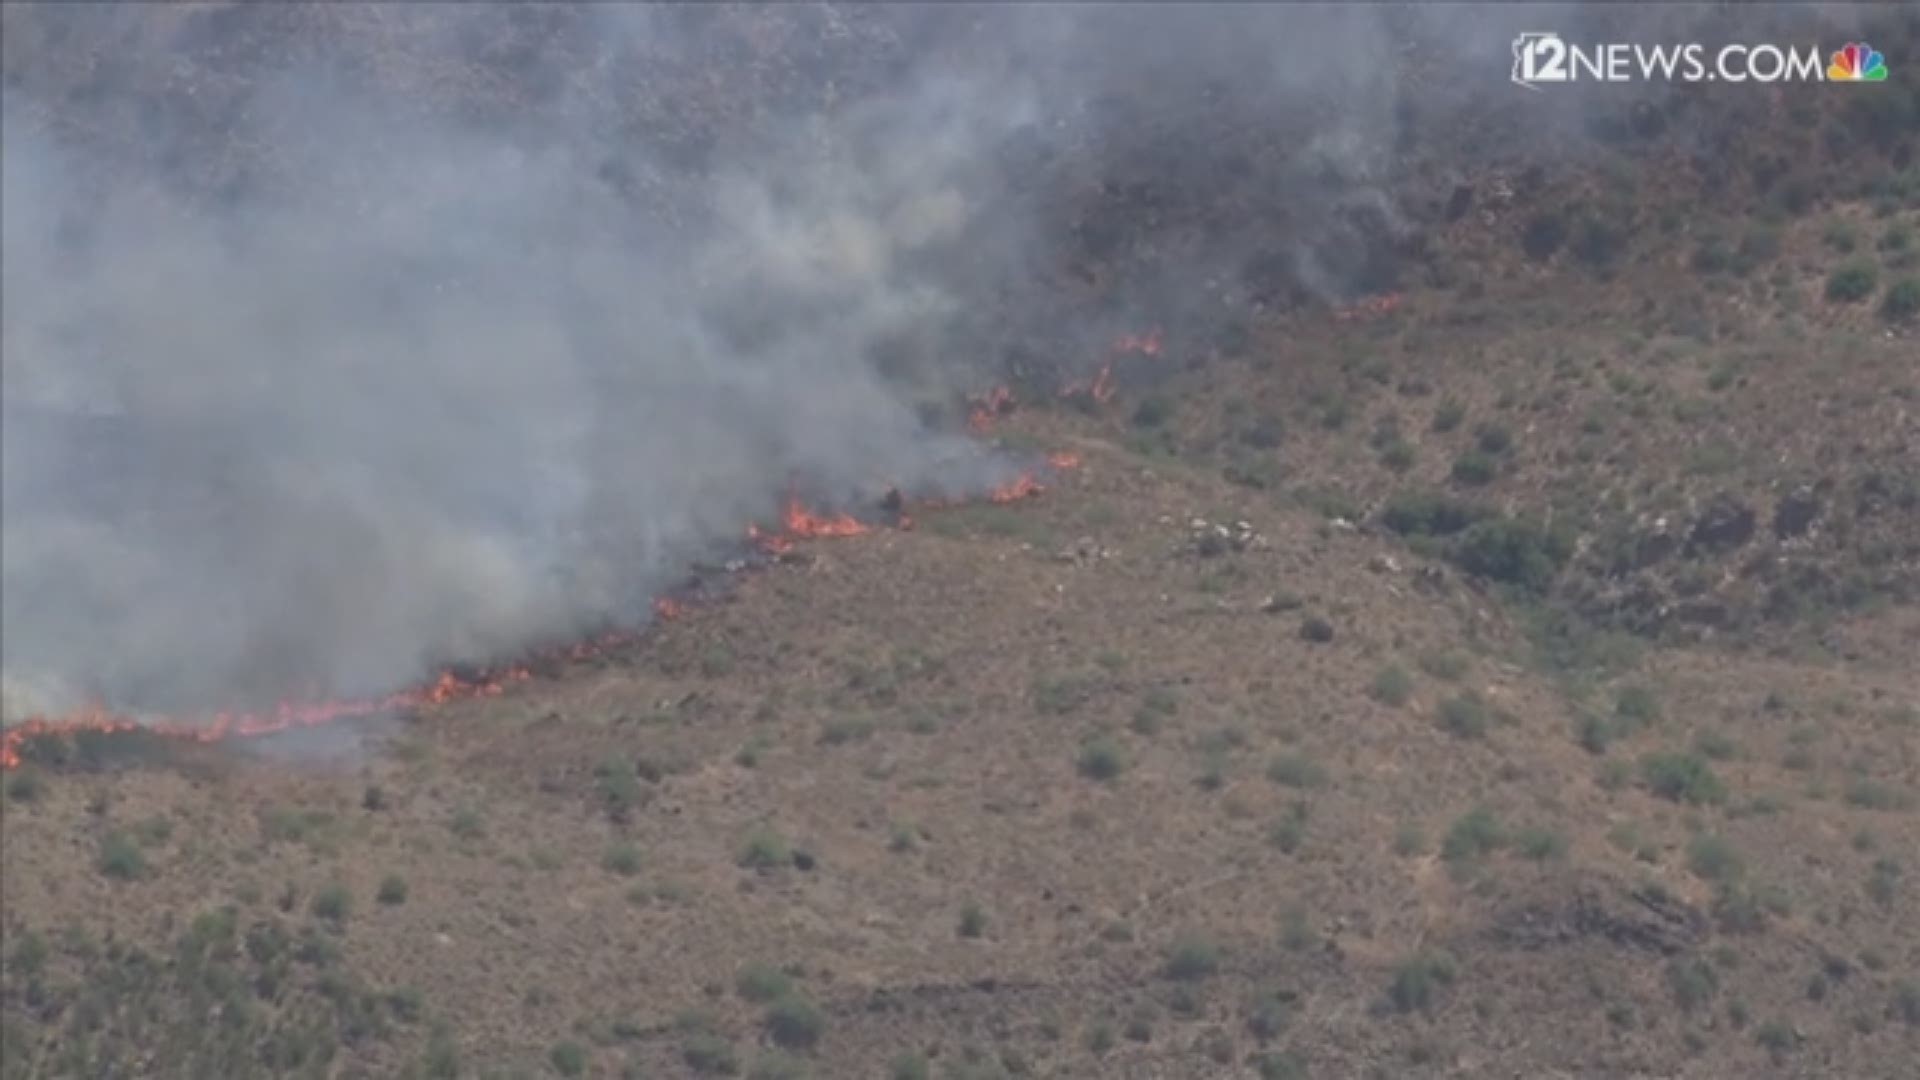 Air and ground crews are responding to the quickly-growing Bumble Bee Fire. It's burning 7 miles north of Black Canyon City, west of I-17. The fire started Friday.